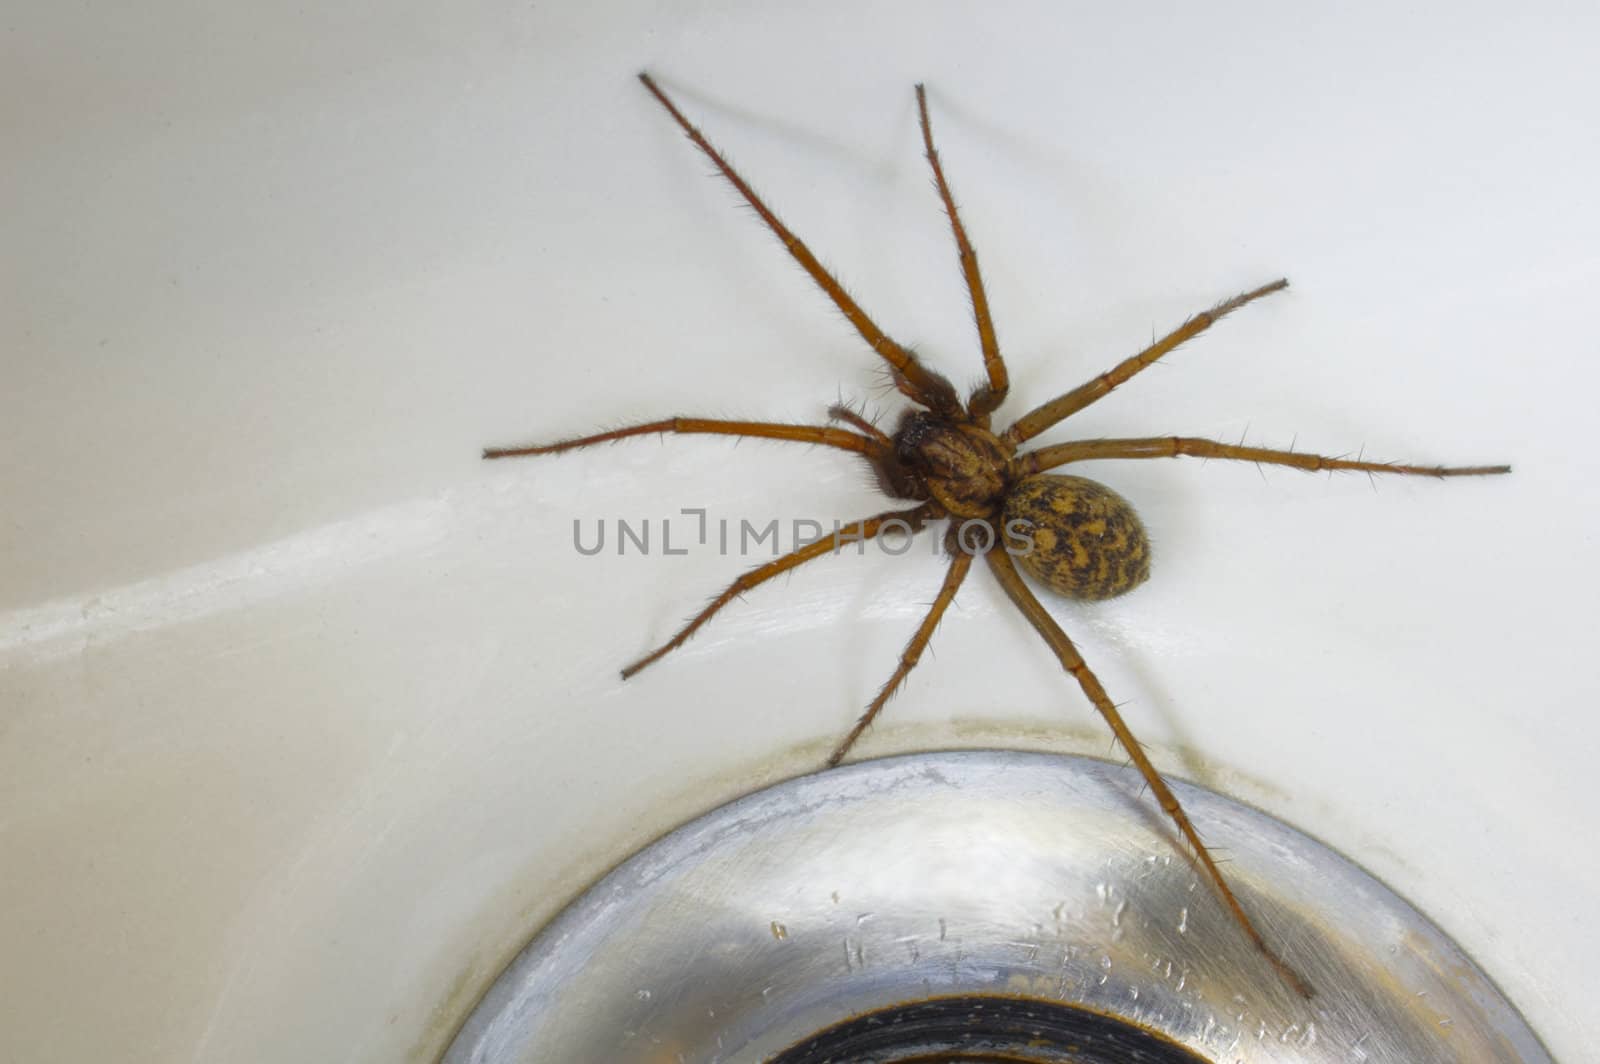 A common house spider (Tegenaria gigantea) trapped in the bath. Space for text on the white of the porcelain.